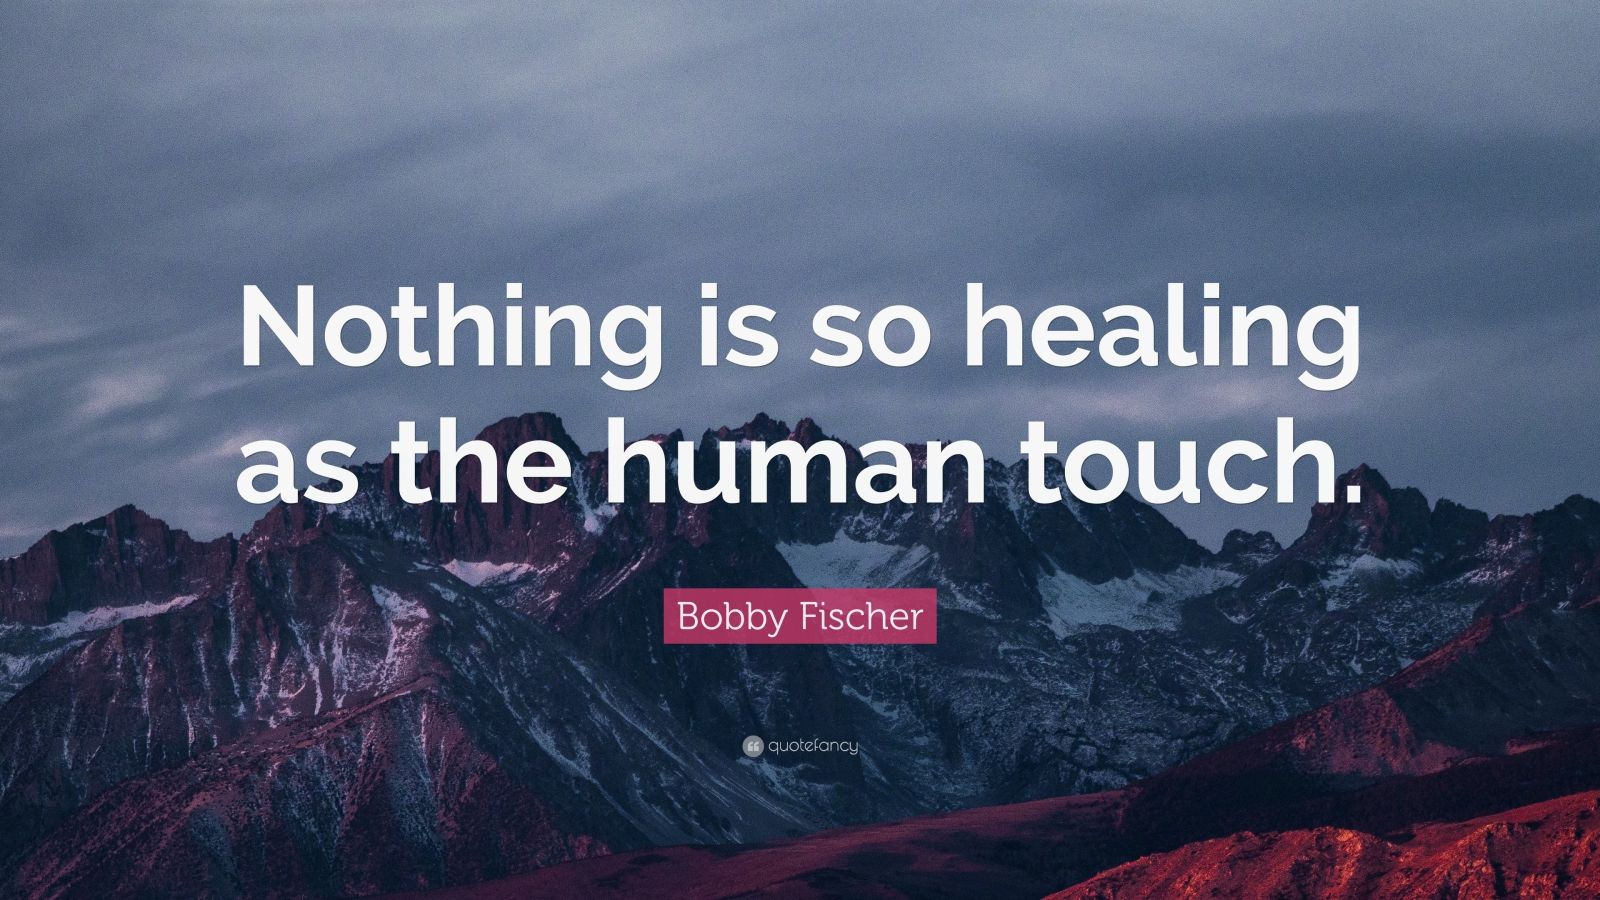 Bobby Fischer Quote: “Nothing is so healing as the human touch.” (7 ...